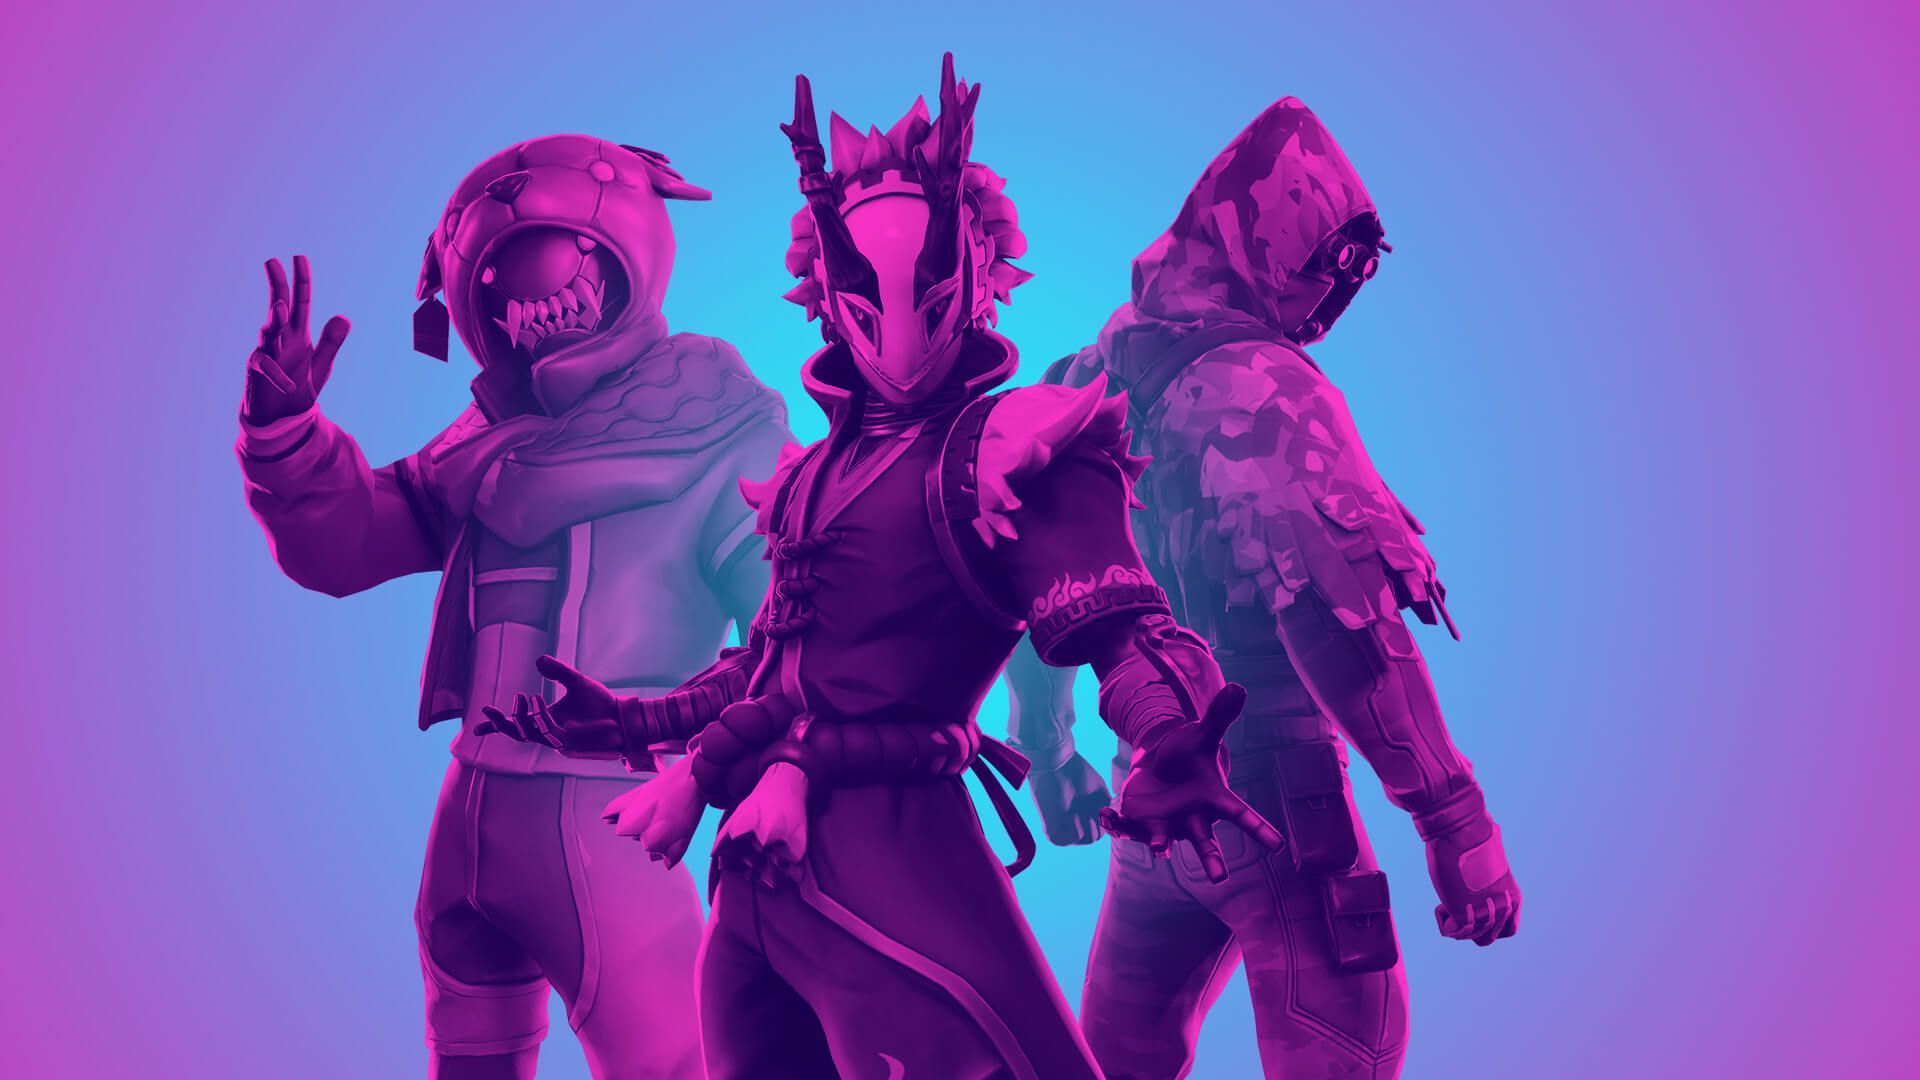 What's Next for Competitive Fortnite?